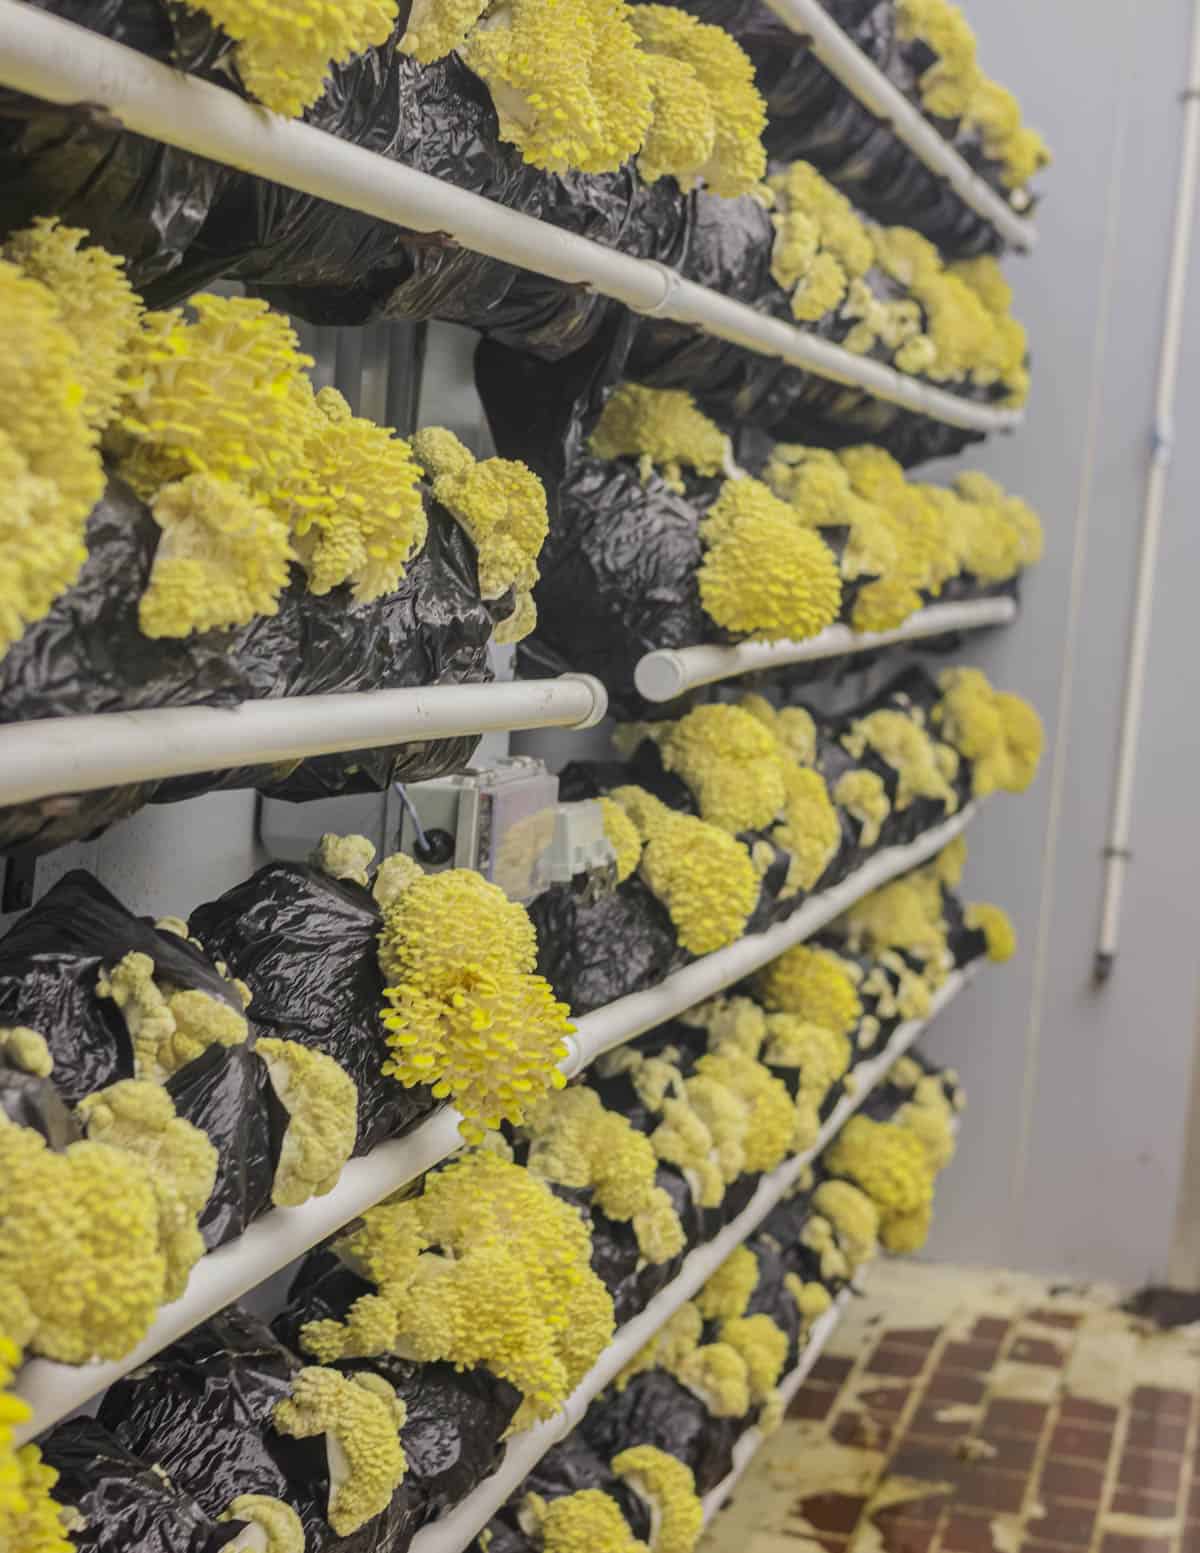 A large room full of cultivated golden oyster mushrooms from R and R cultivation in MN.